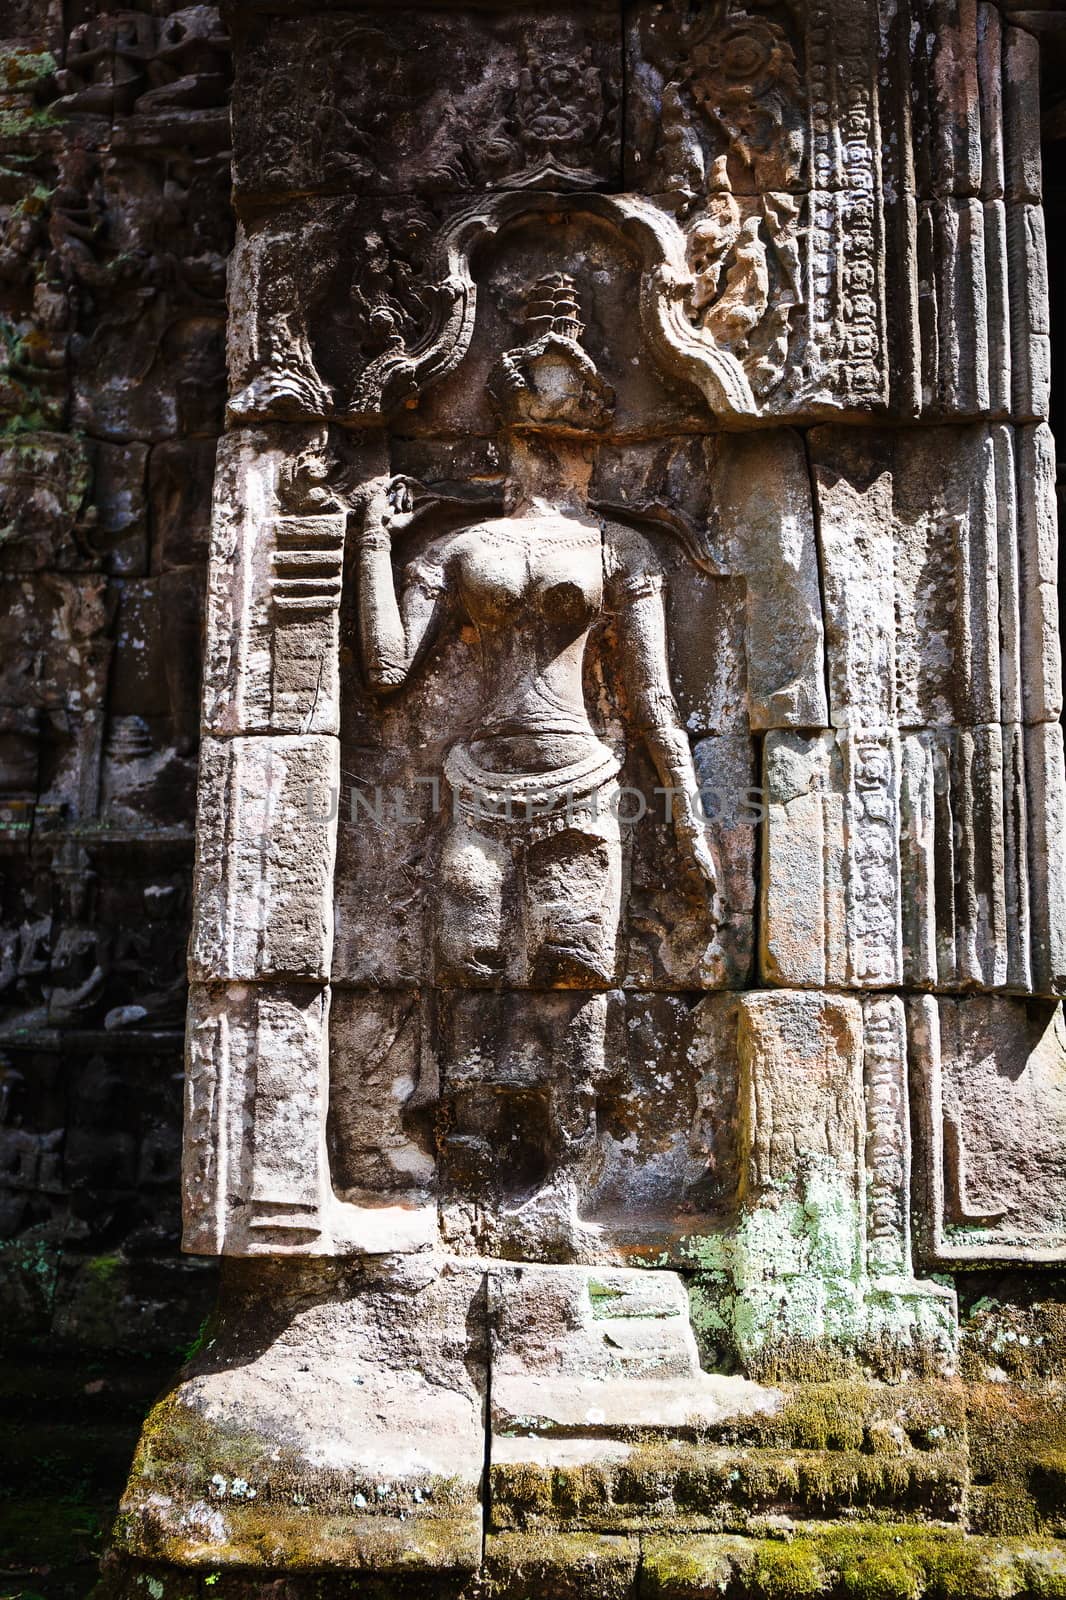 Bas relief in Banteay Srei, Cambodia by gorov108